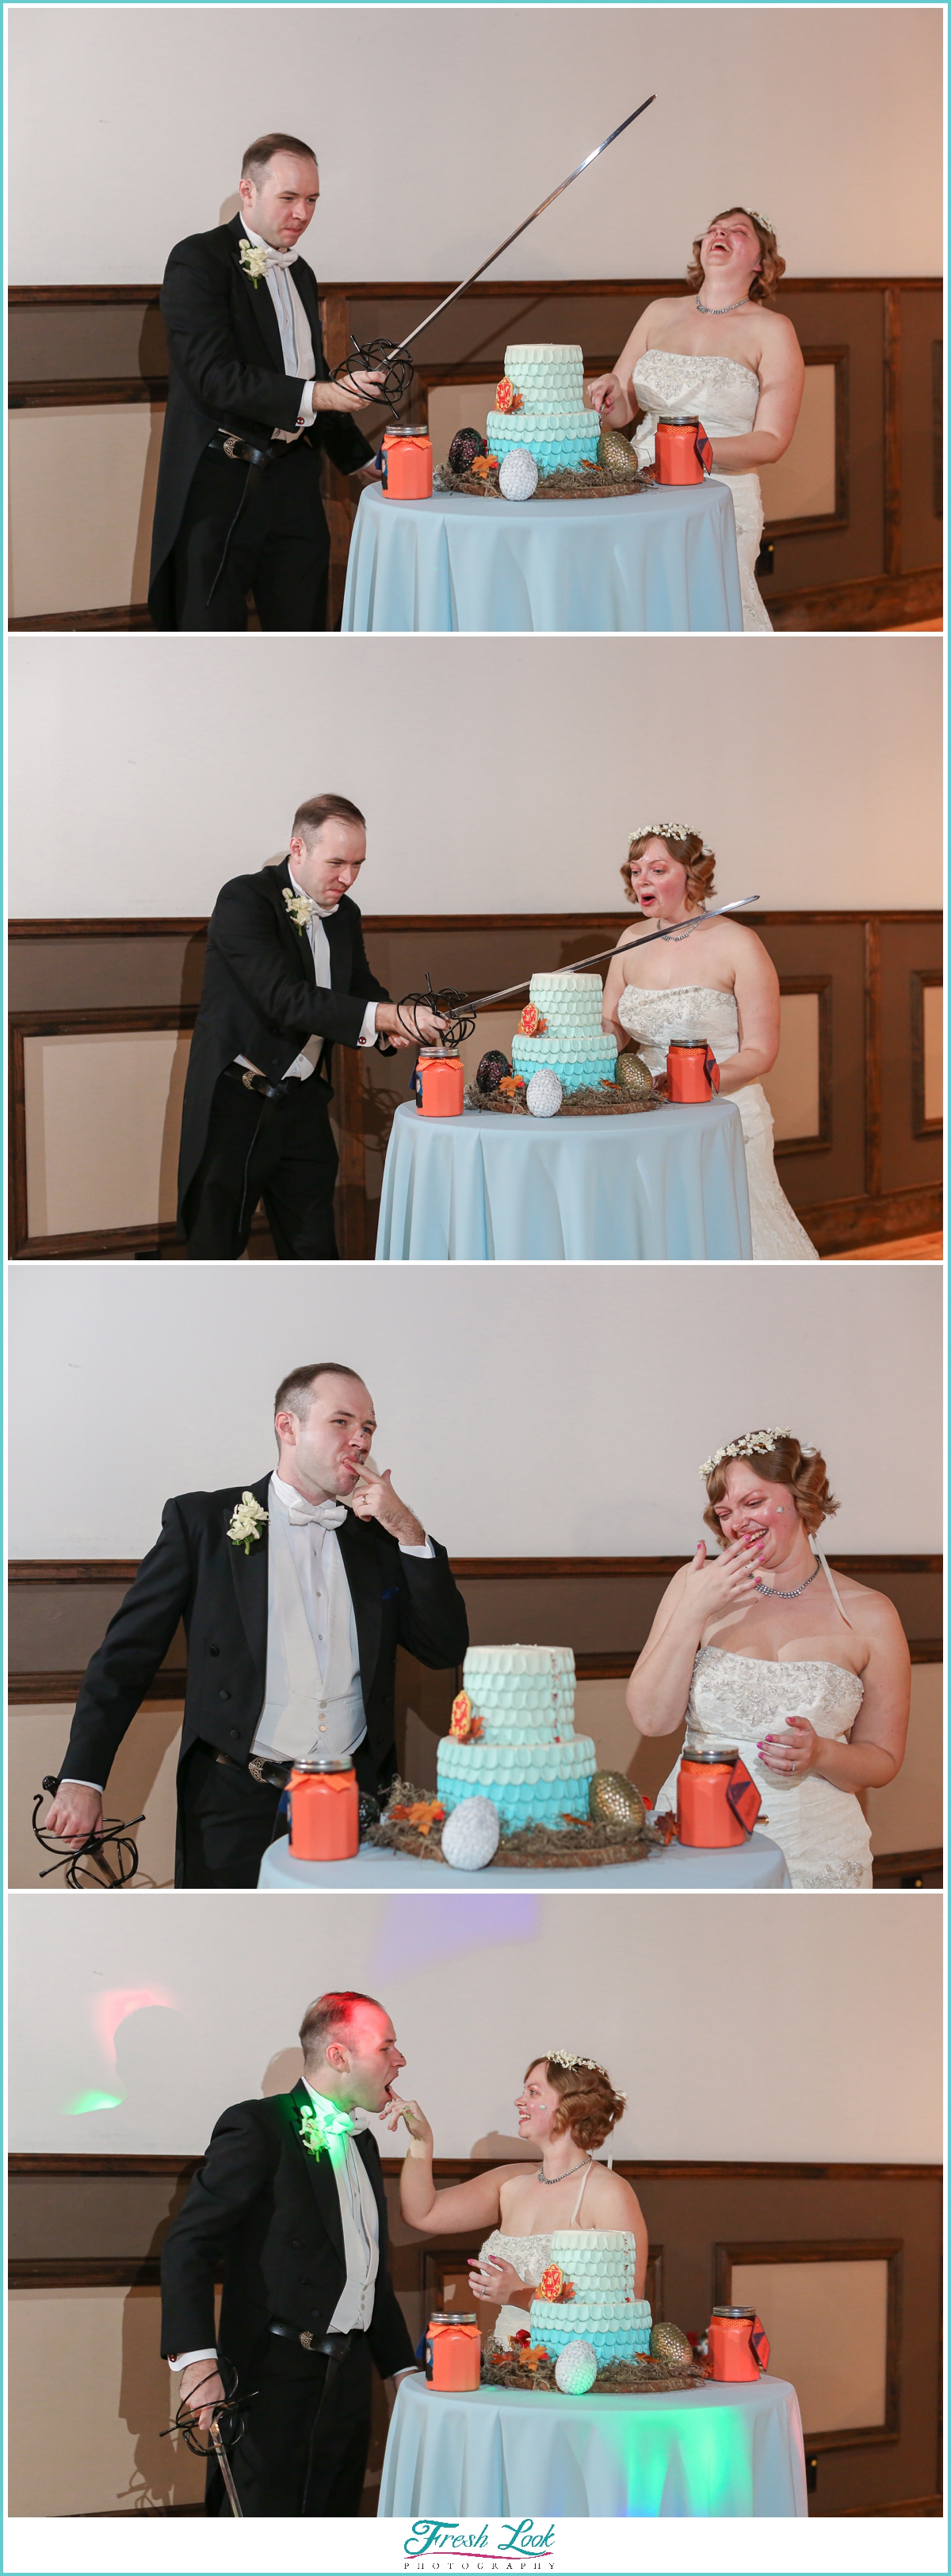 cake cutting at the wedding reception